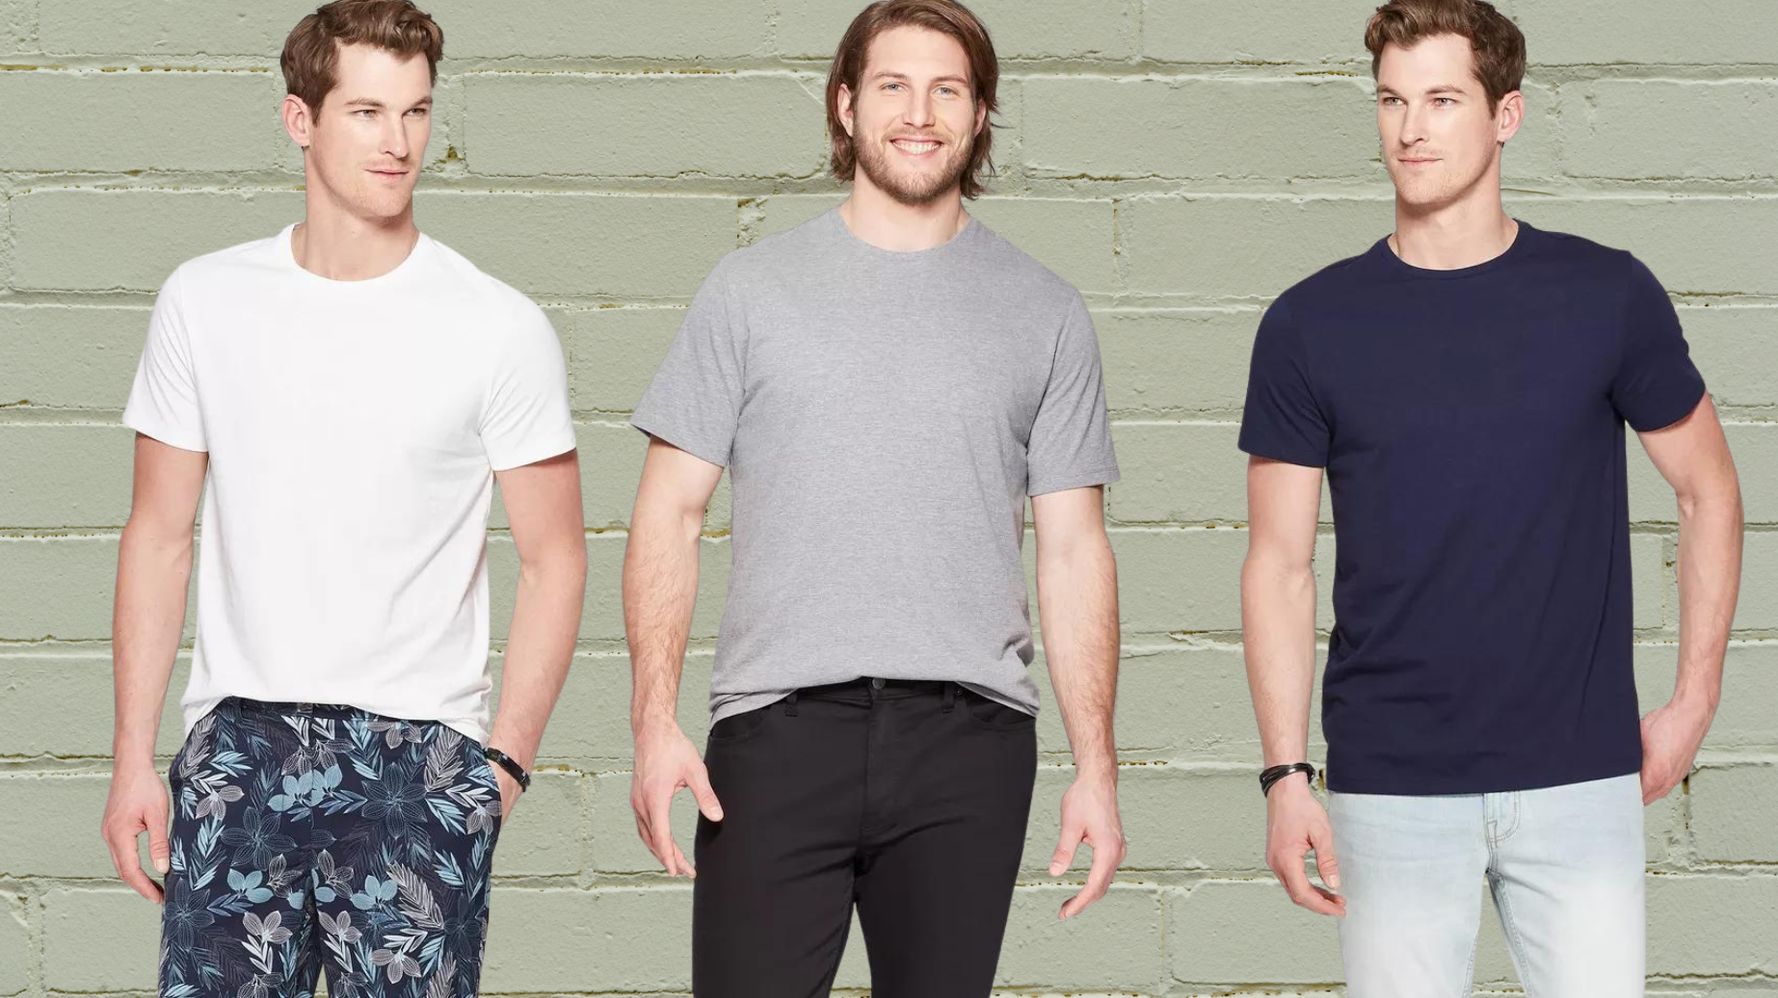 Begivenhed Kloster kiwi This $6 Target Men's T-Shirt Has Hundreds Of Reviews | HuffPost Life